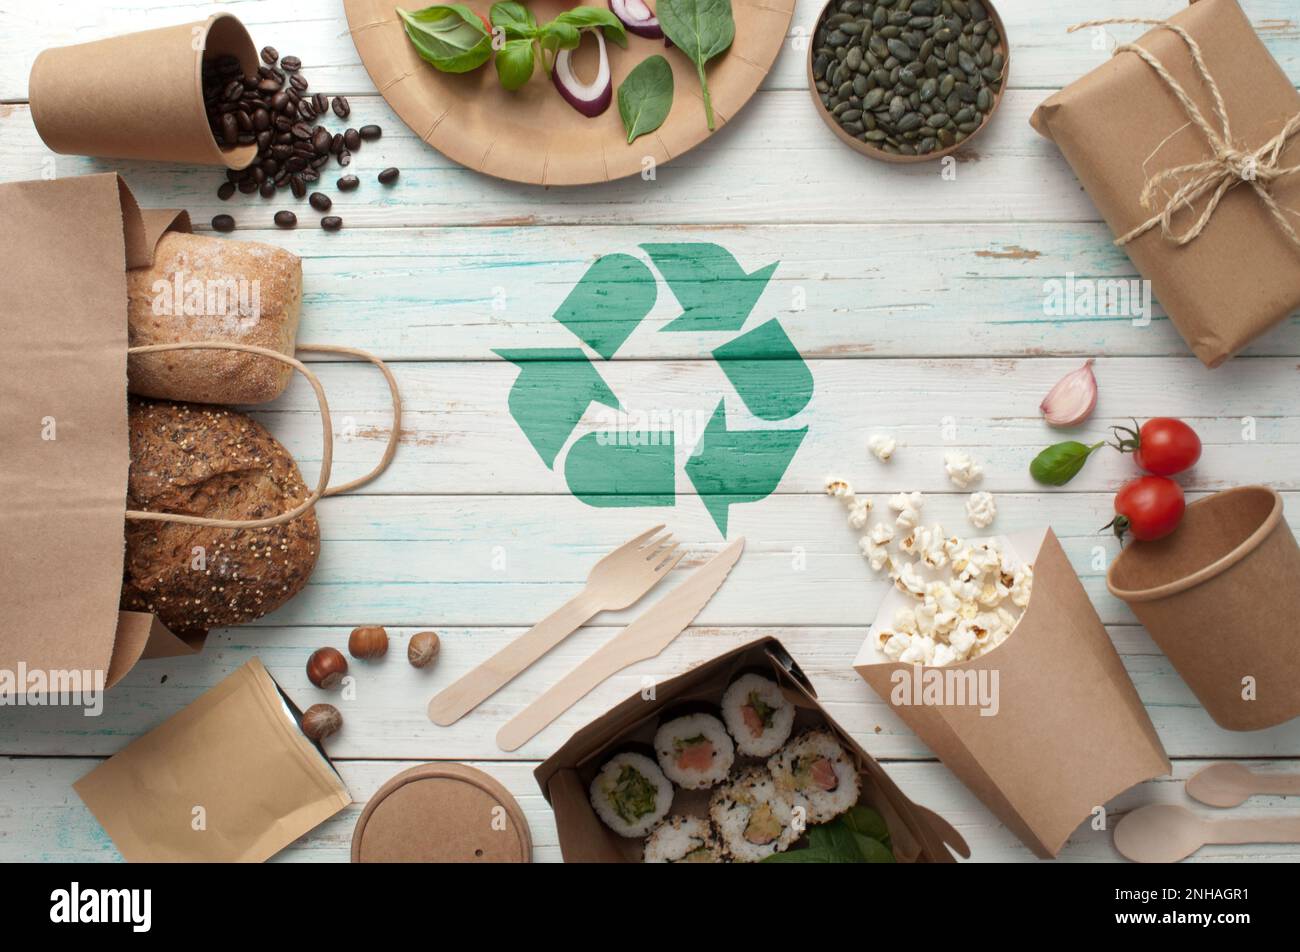 Collection of eco sustainable food packaging with recycling symbol, low carbon green revolution concept Stock Photo